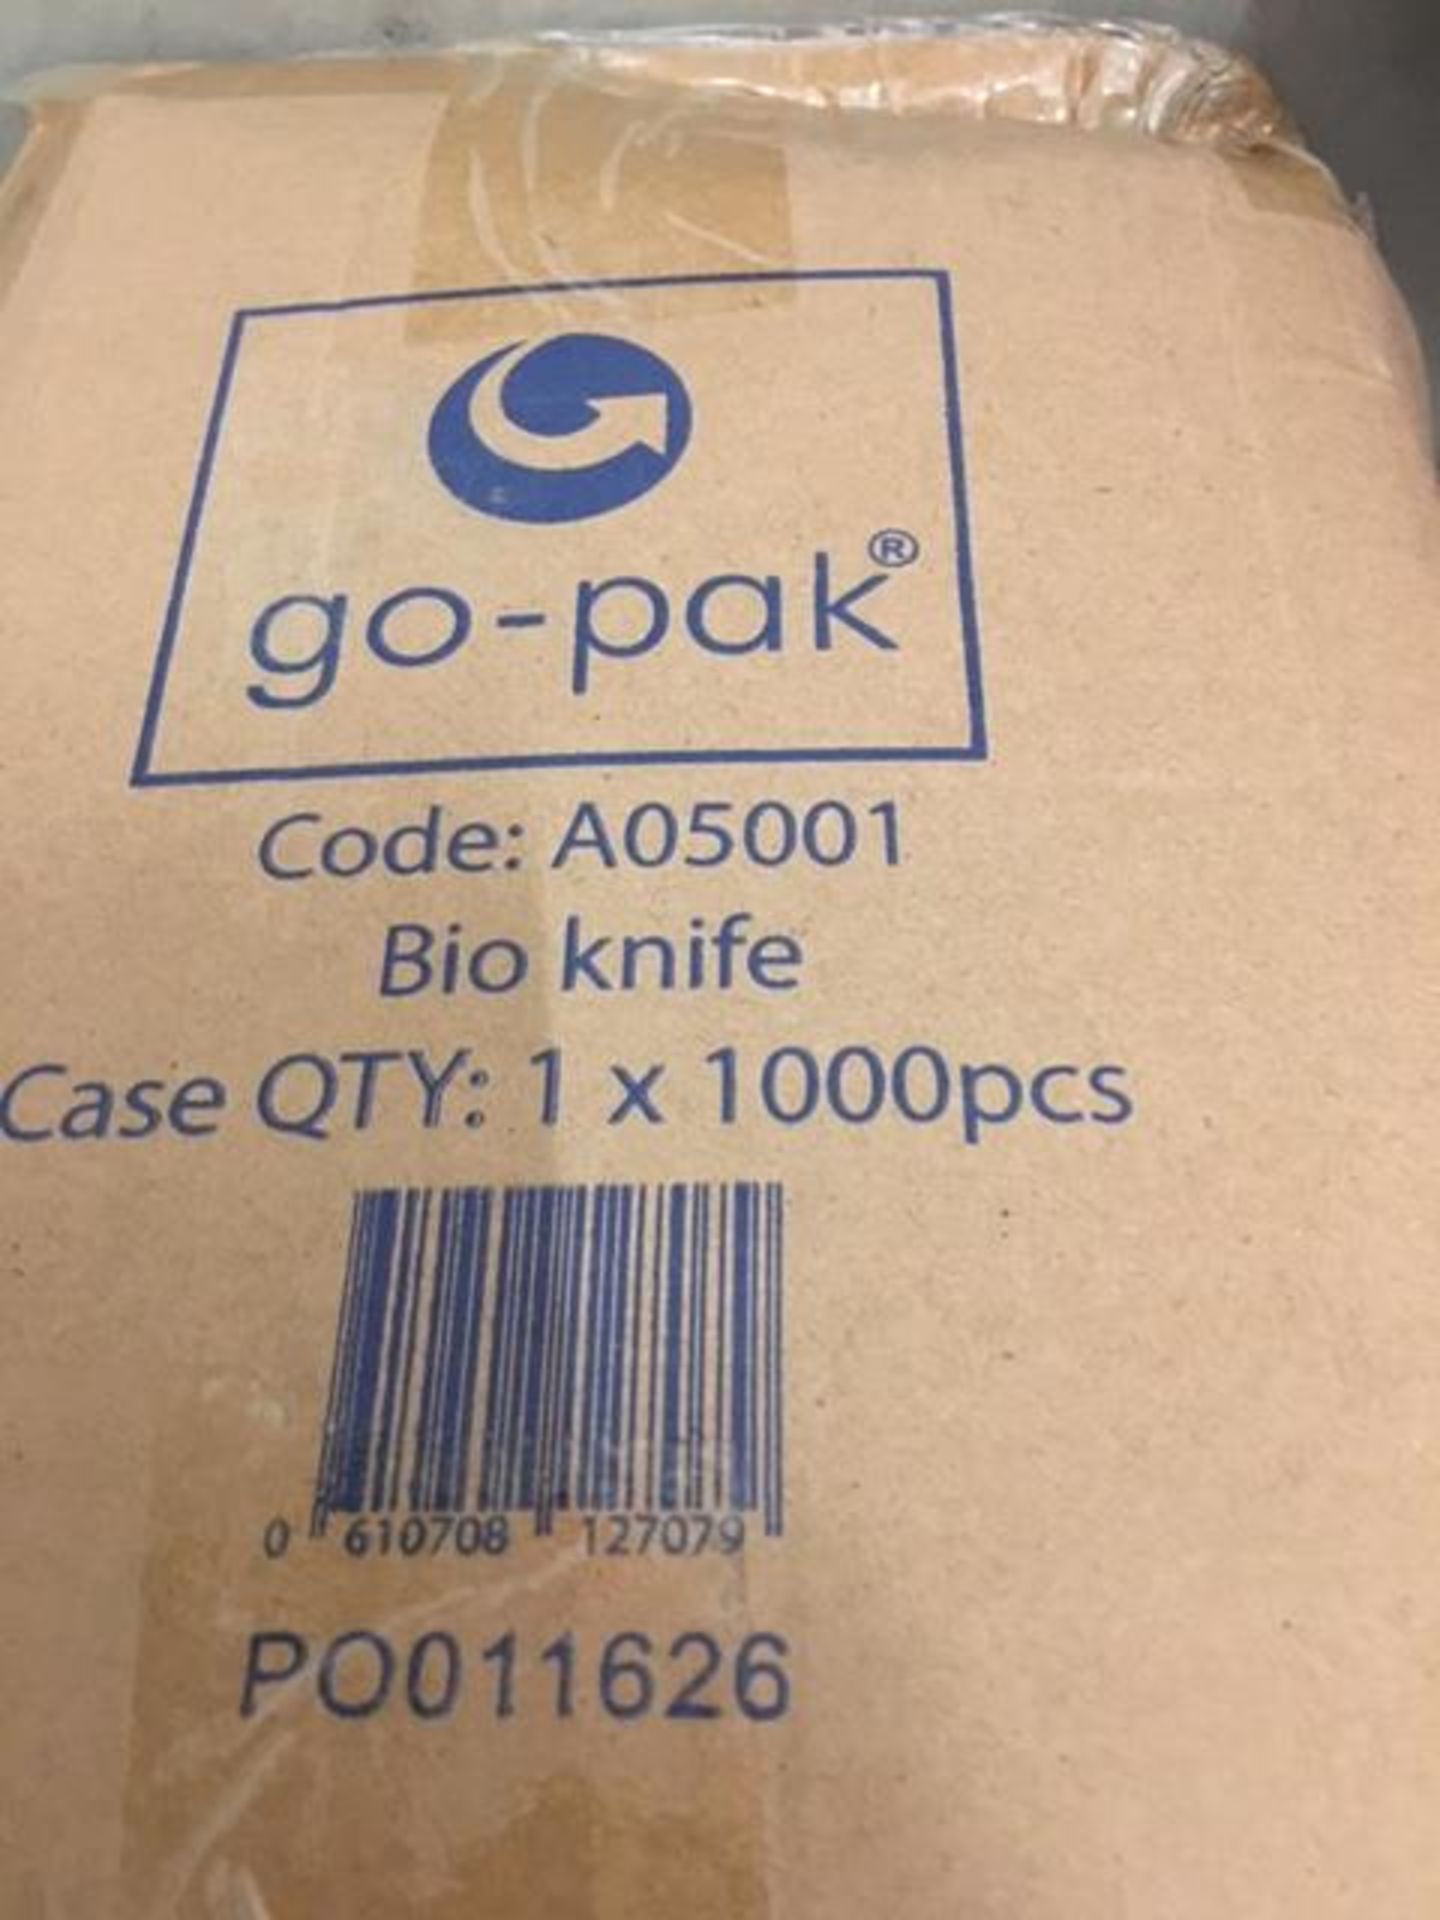 38 Packets Of 50 Go pack Plastic Knives - Image 2 of 2